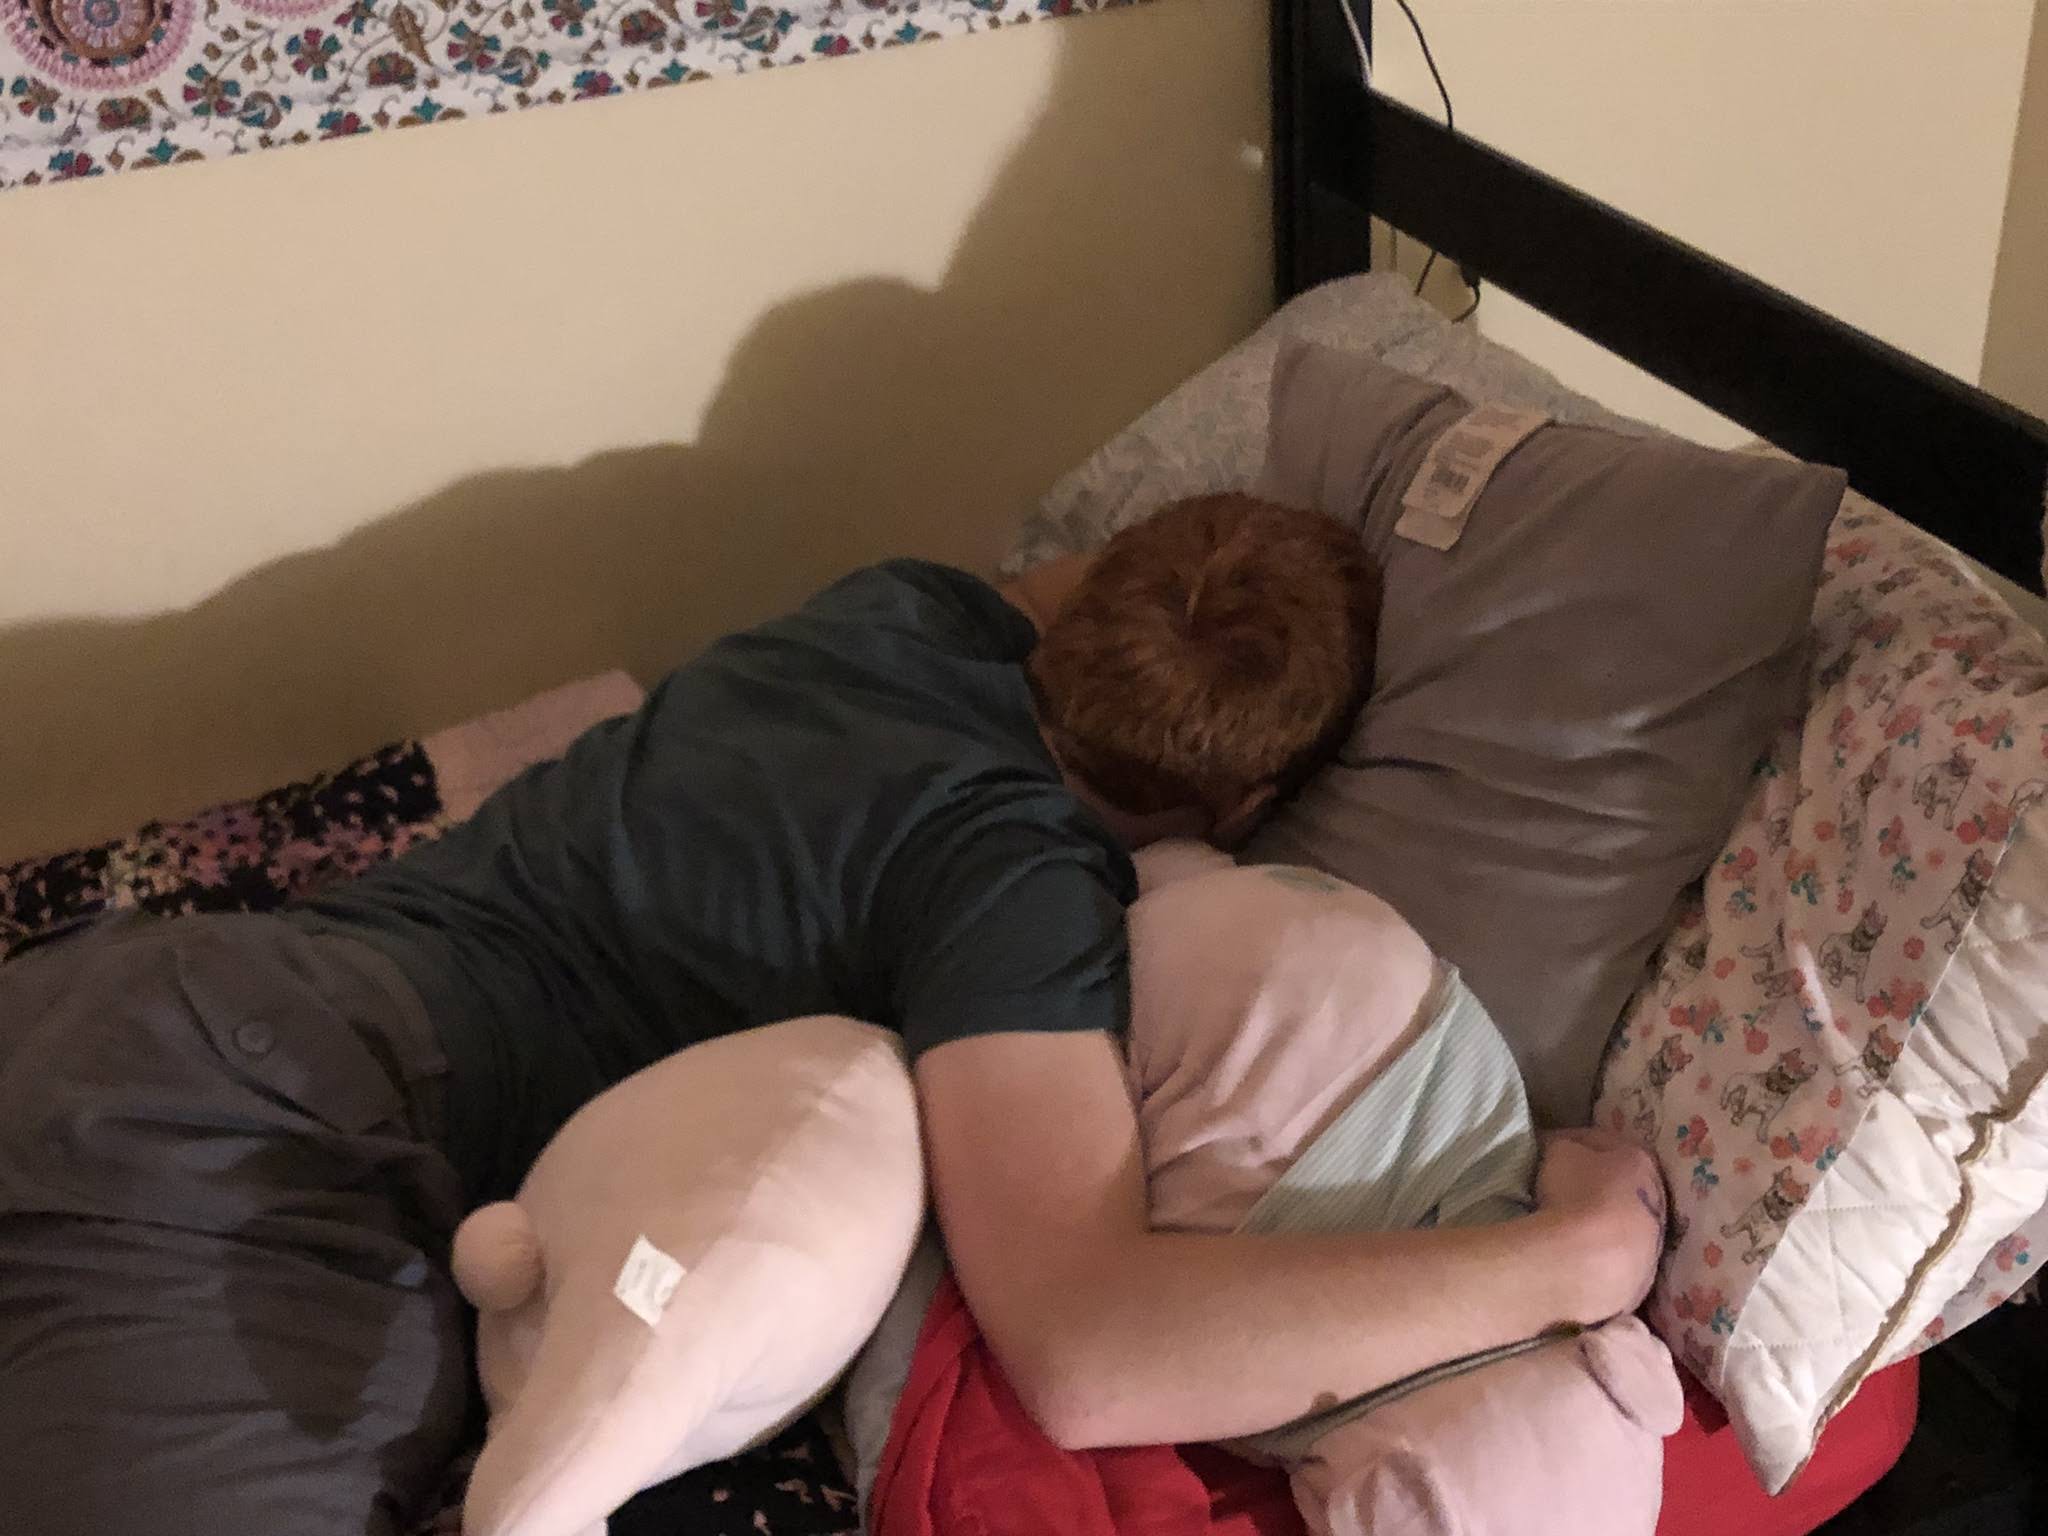 Chase Cantor lays in bed snuggling a pink stuffed pig wearing a dark blue shirt and grey shorts.